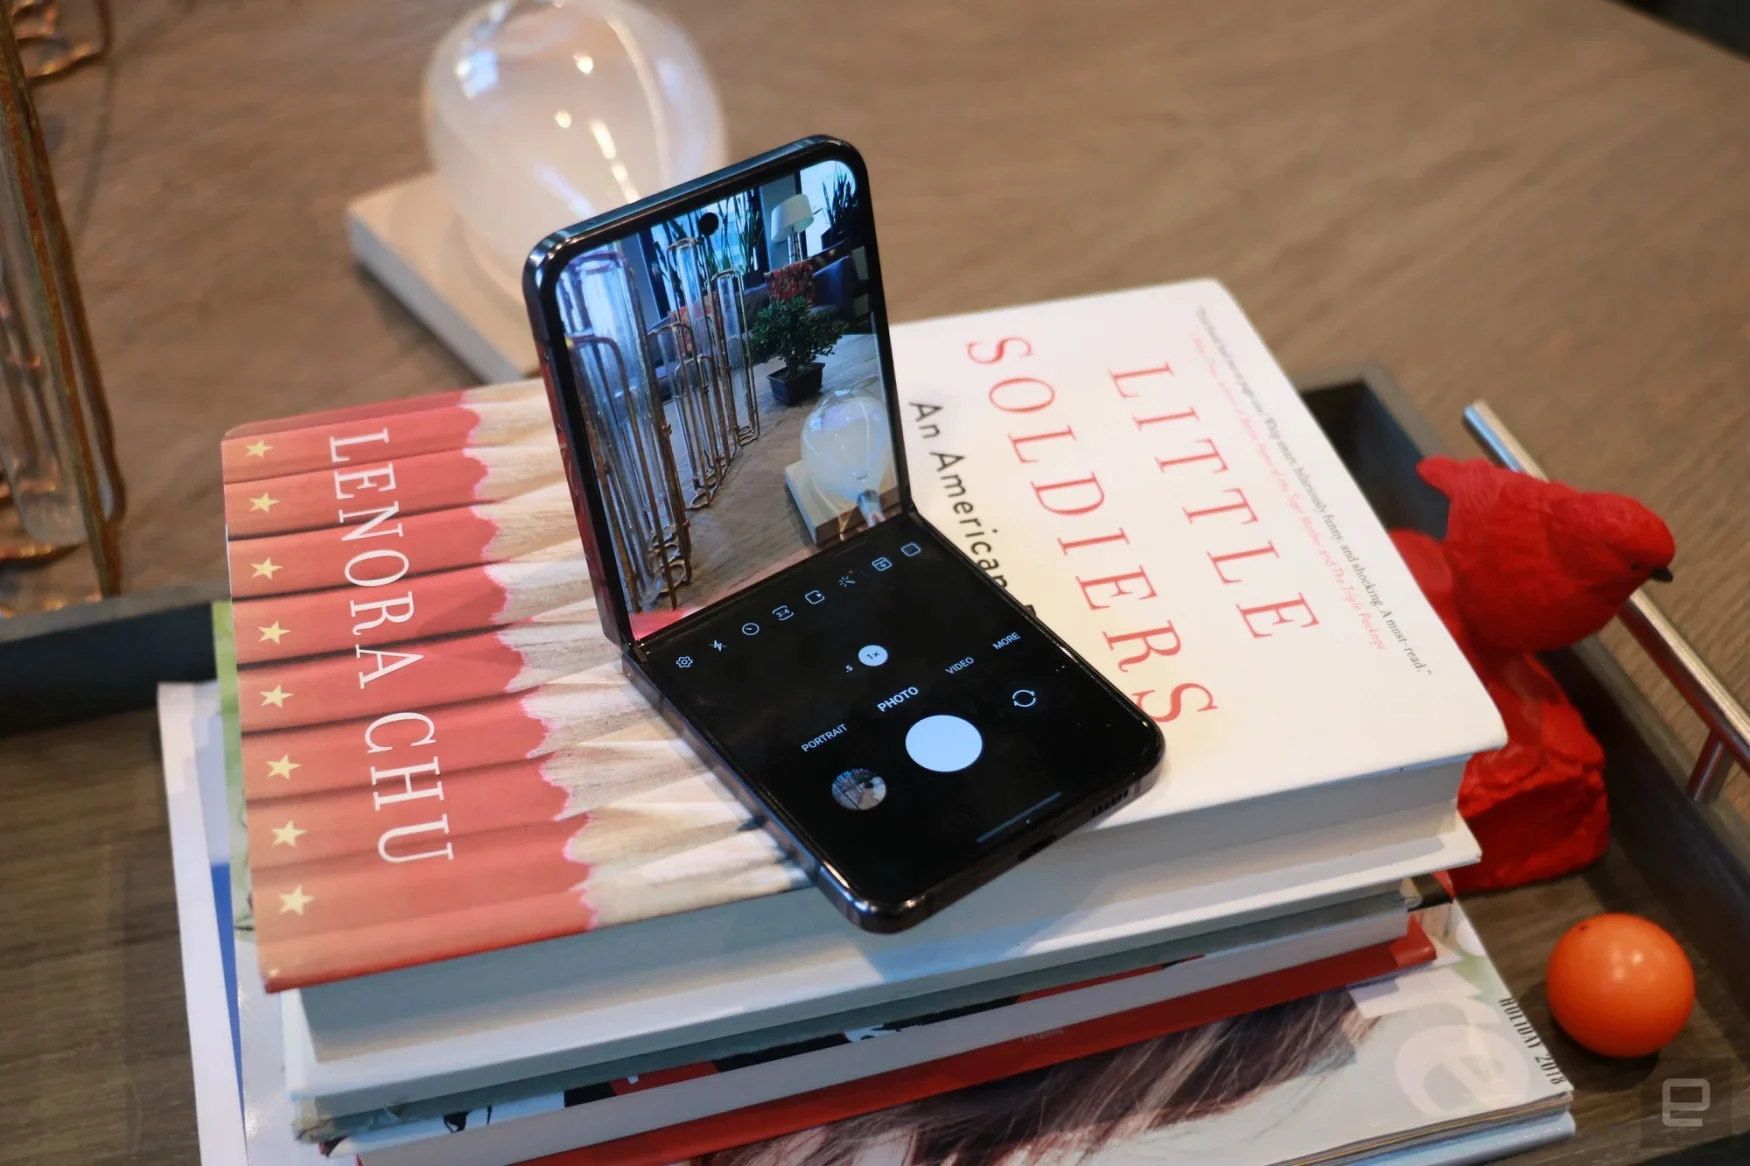 A Samsung Z Flip 5 foldable phone sitting on a pile of books (the top book is 